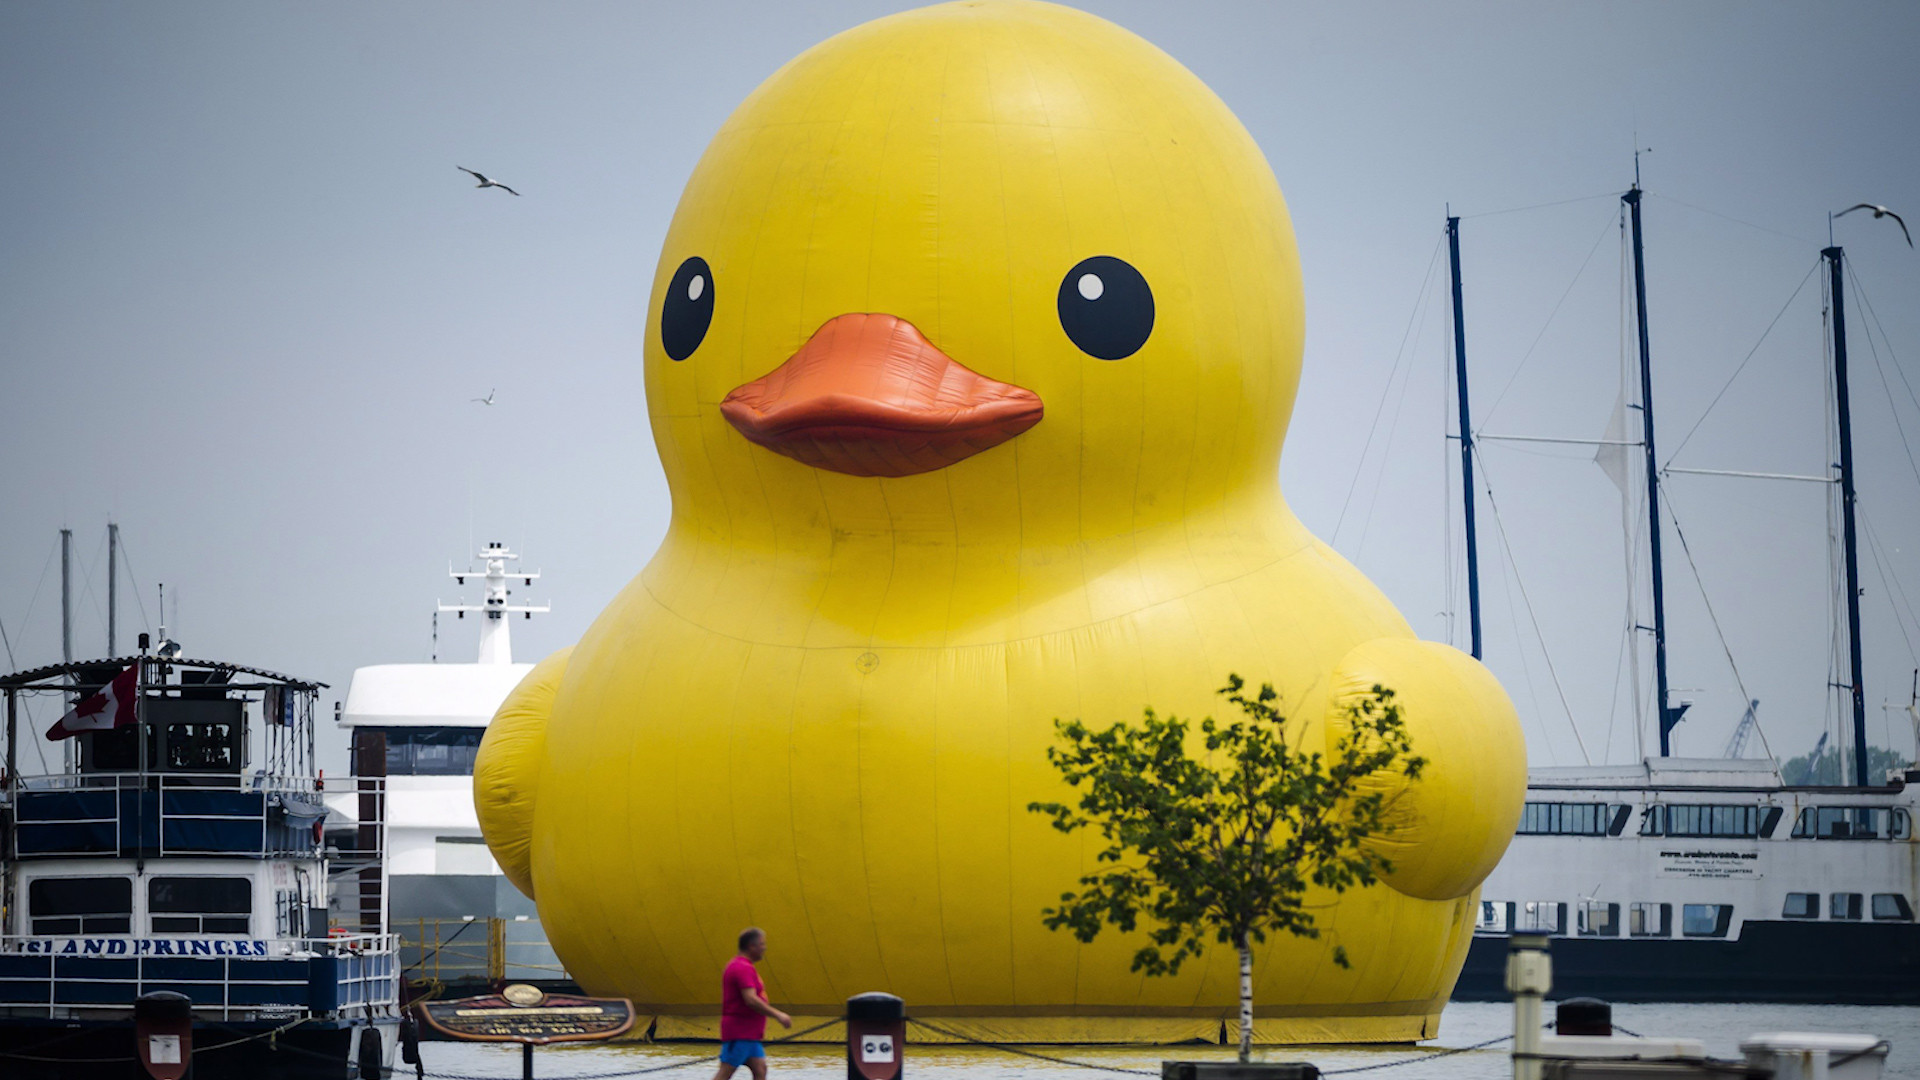 1920x1080 Giant inflatable duck floats in Toronto for festival : Editors picks :  Canoe Video